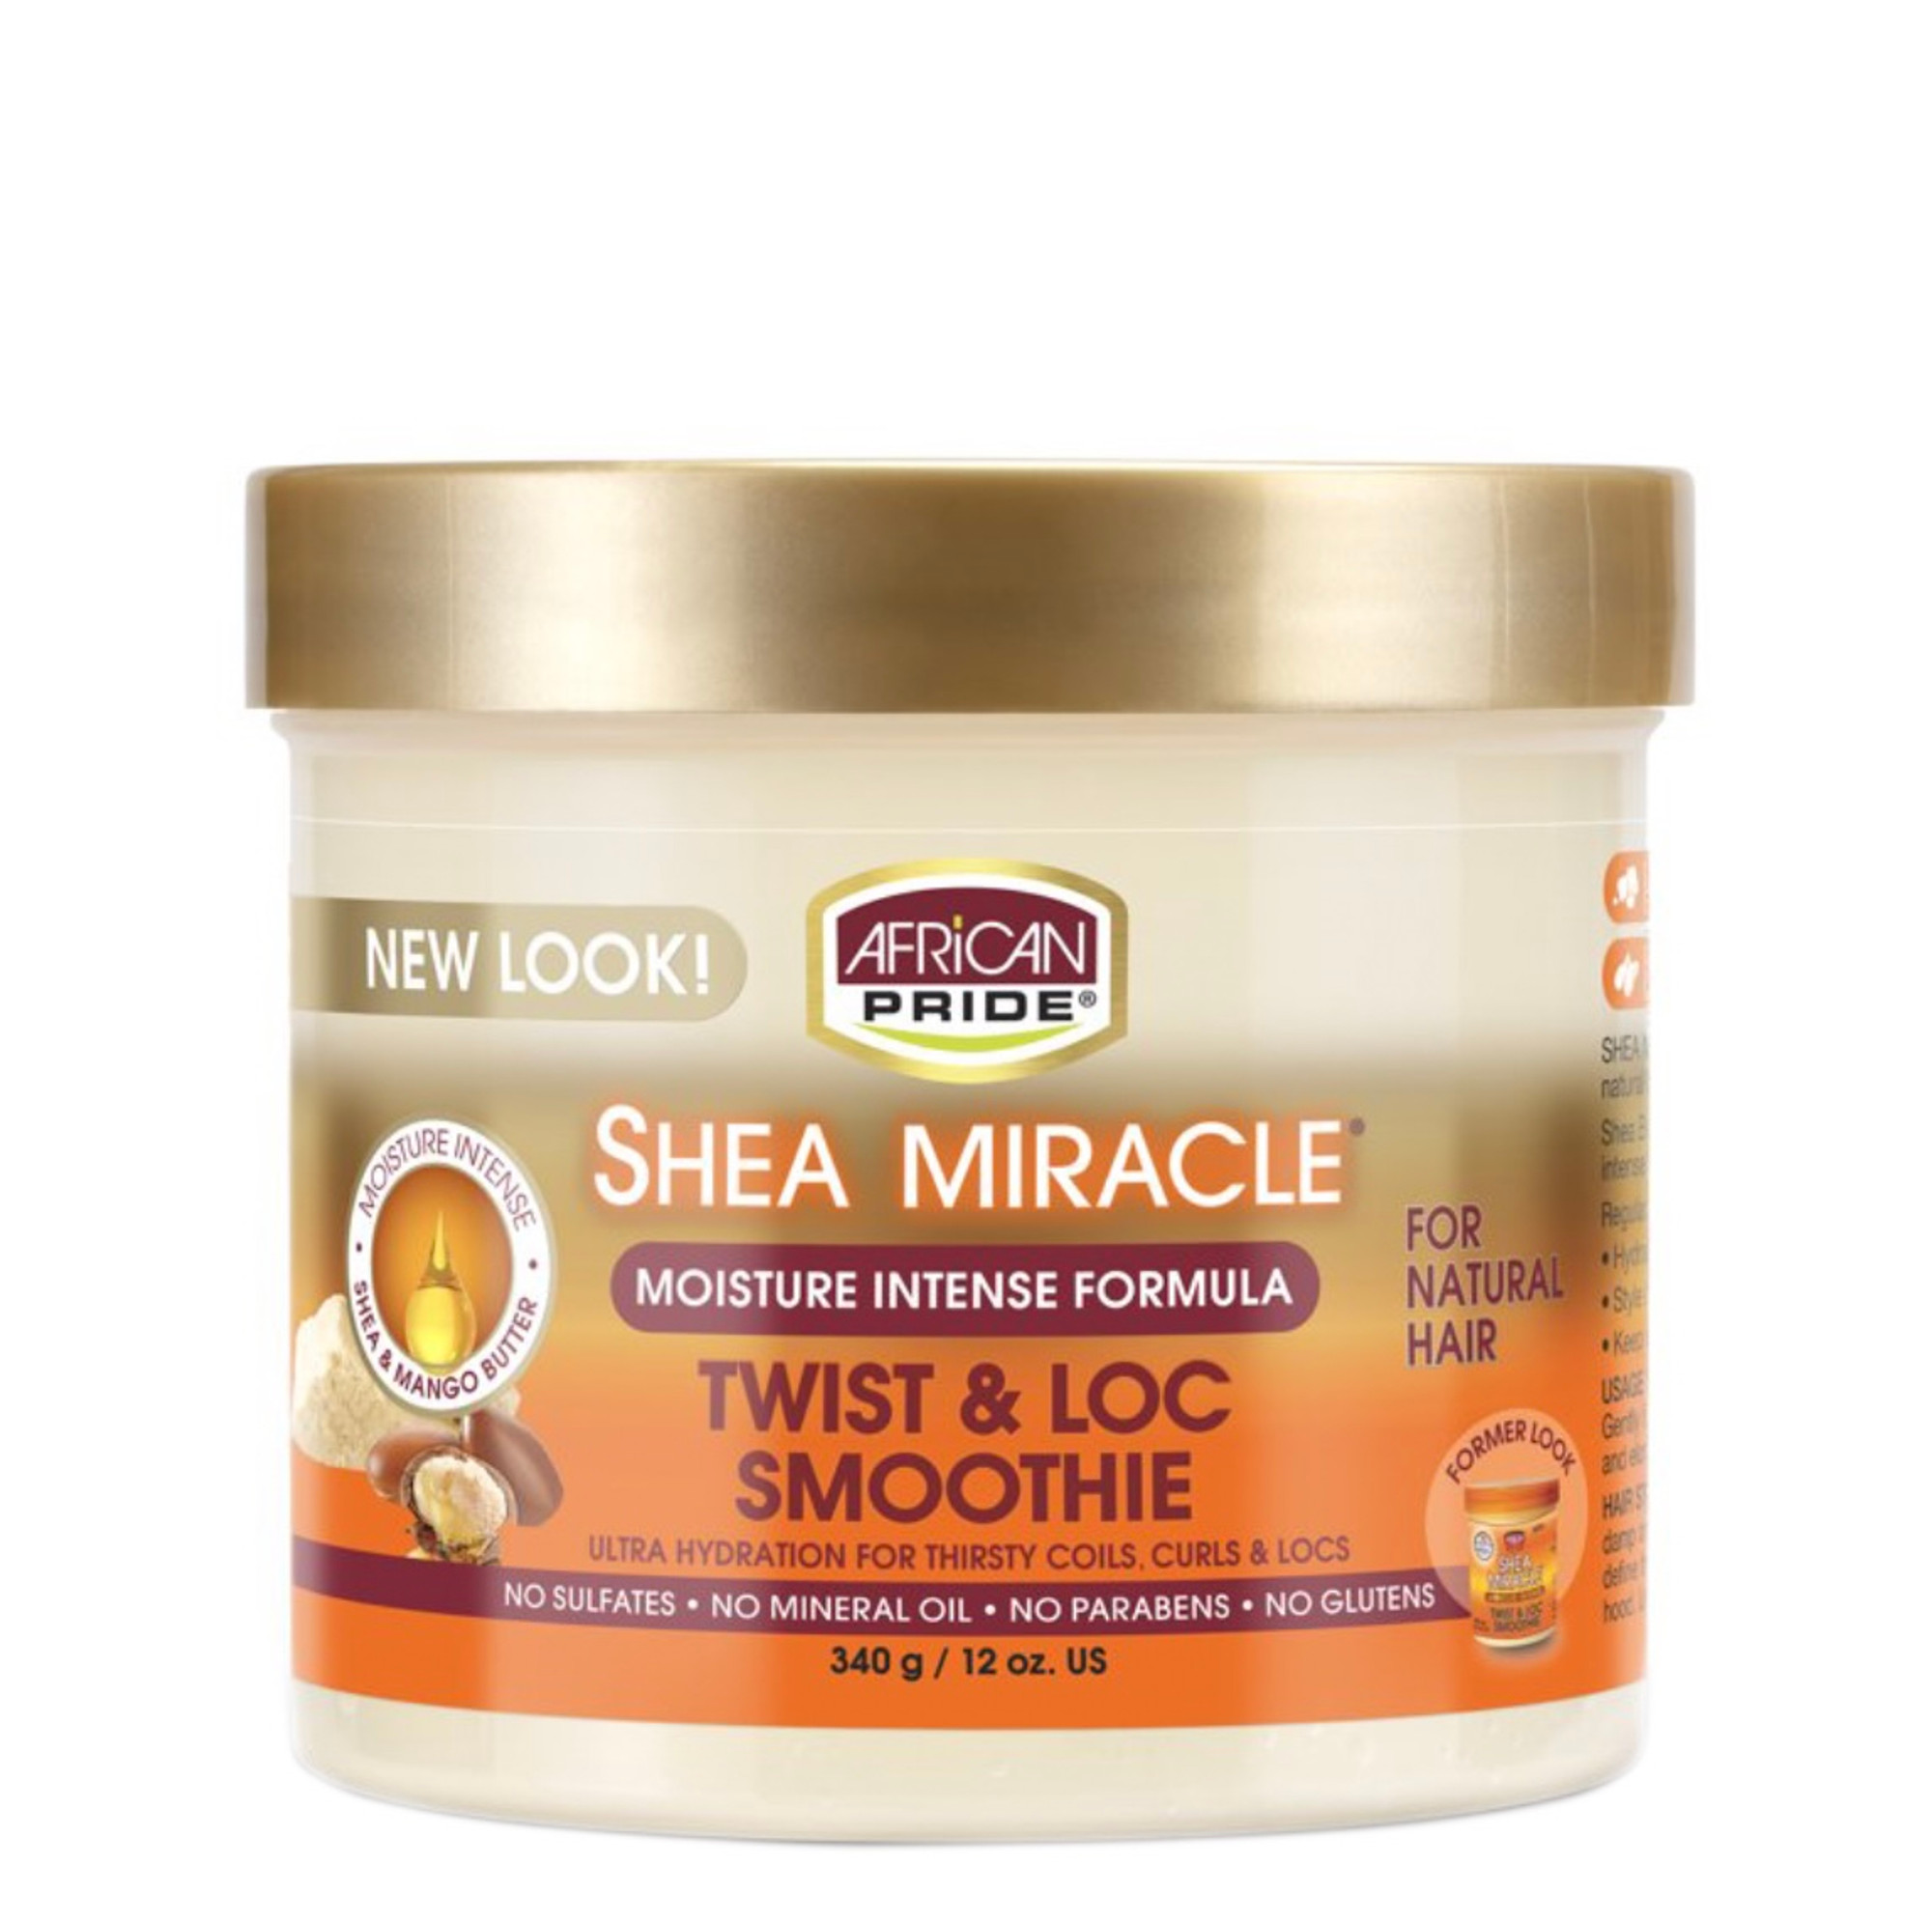 African Pride Shea Miracle Moisture Intense Twist & Loc Smoothie